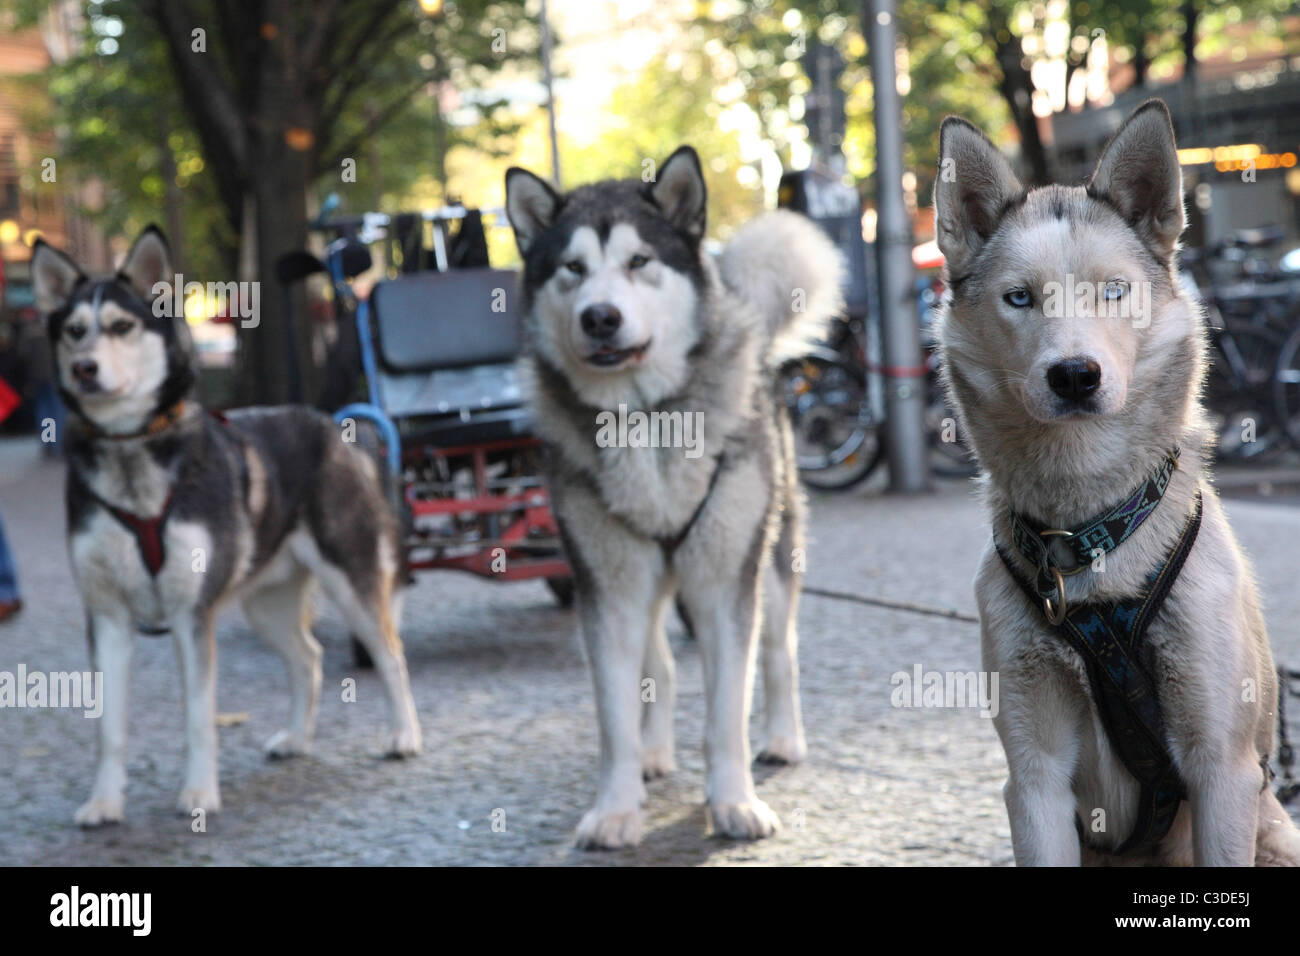 Huskies waiting for customers for a sightseeing tour, Berlin, Germany Stock Photo